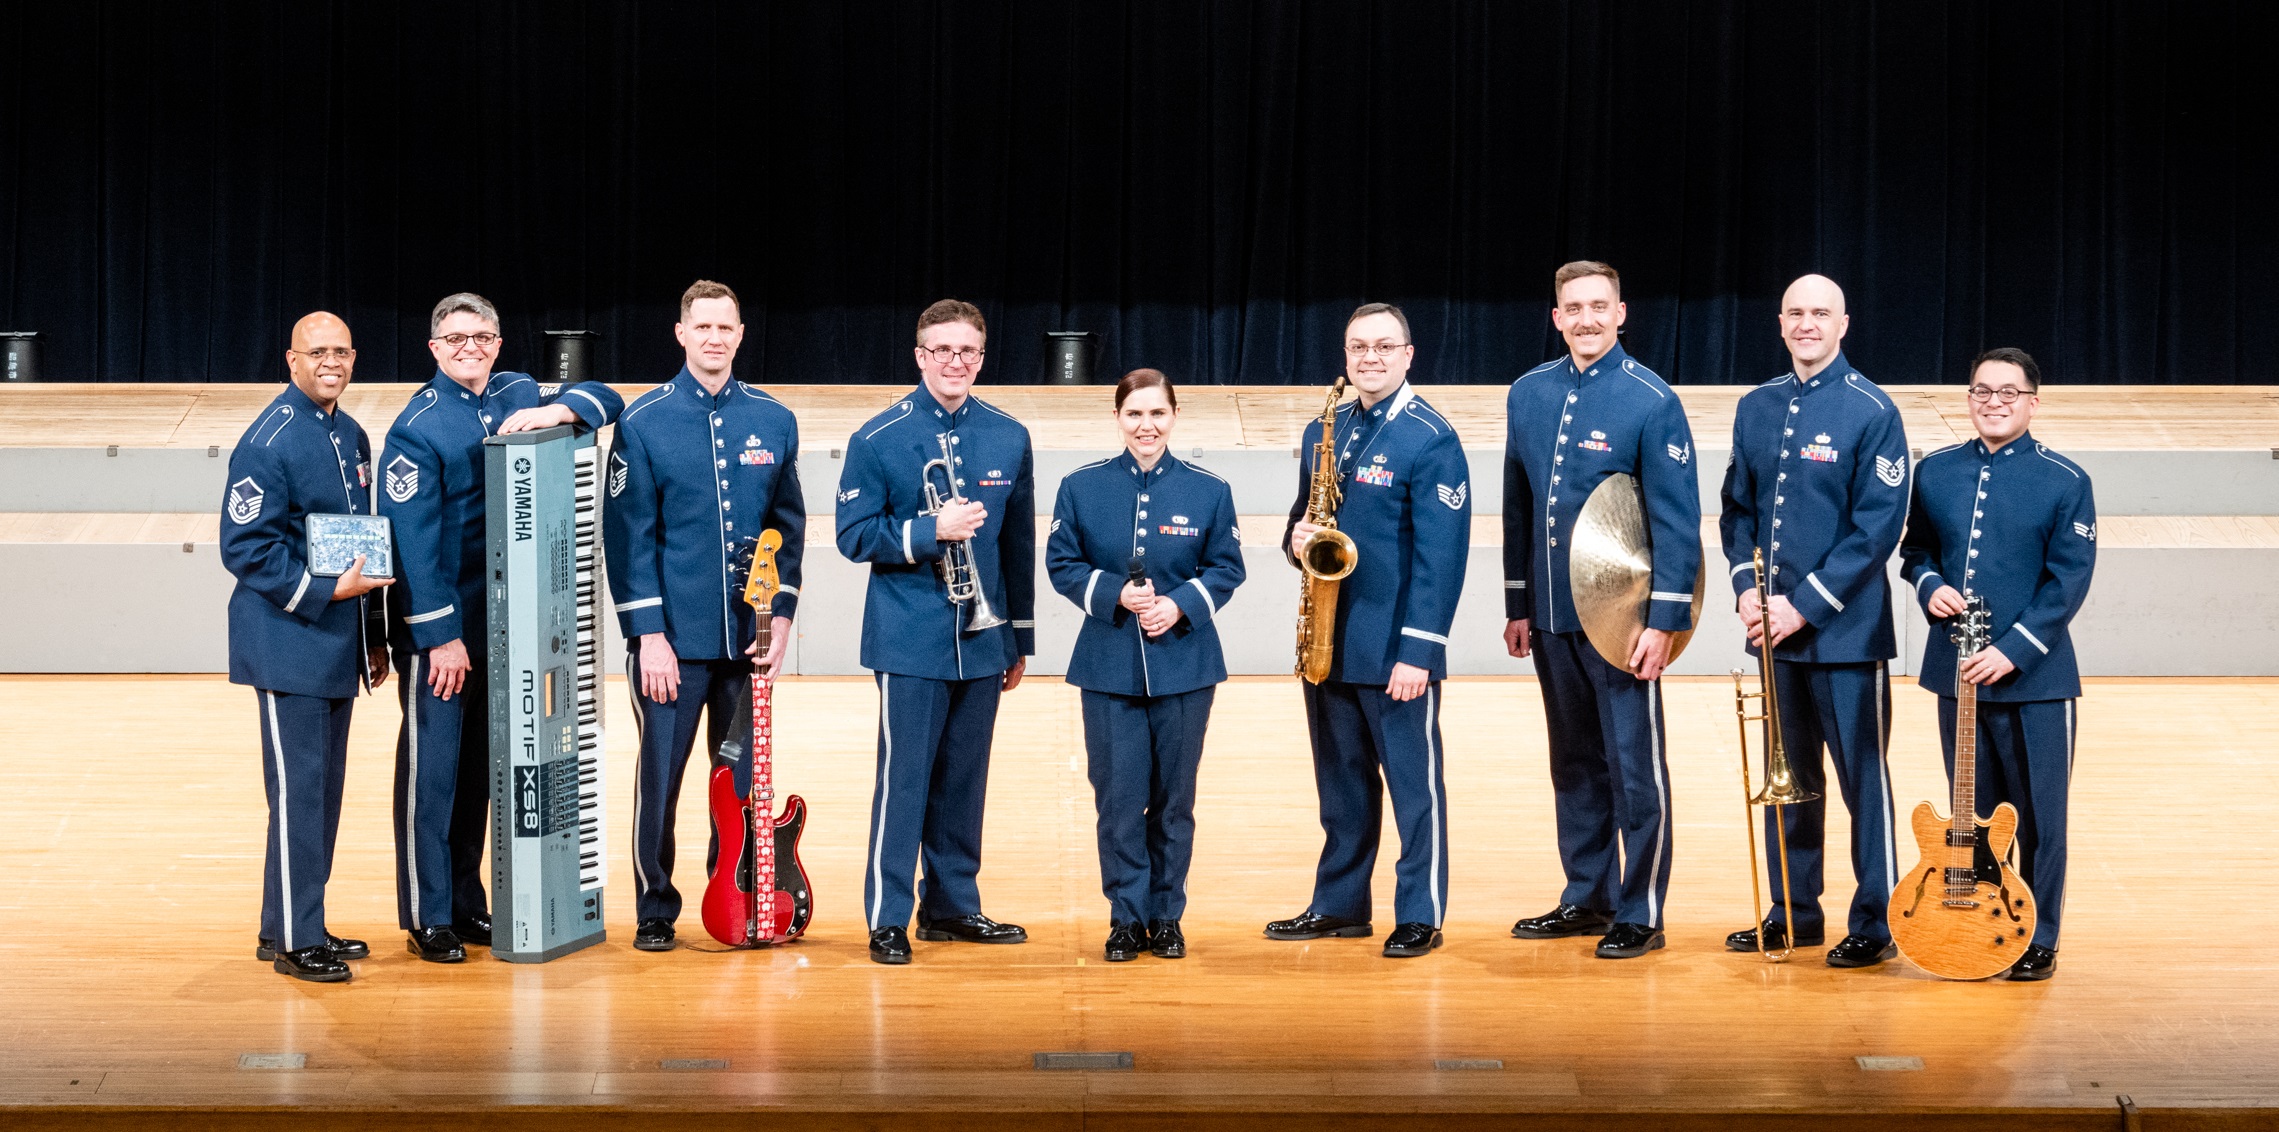 Nine members of the Final Approach rock ensemble stand on a wooden stage wearing their dark blue tunic uniforms with silver buttons and stripes, holding a variety of rock instruments including guitars and pianos.